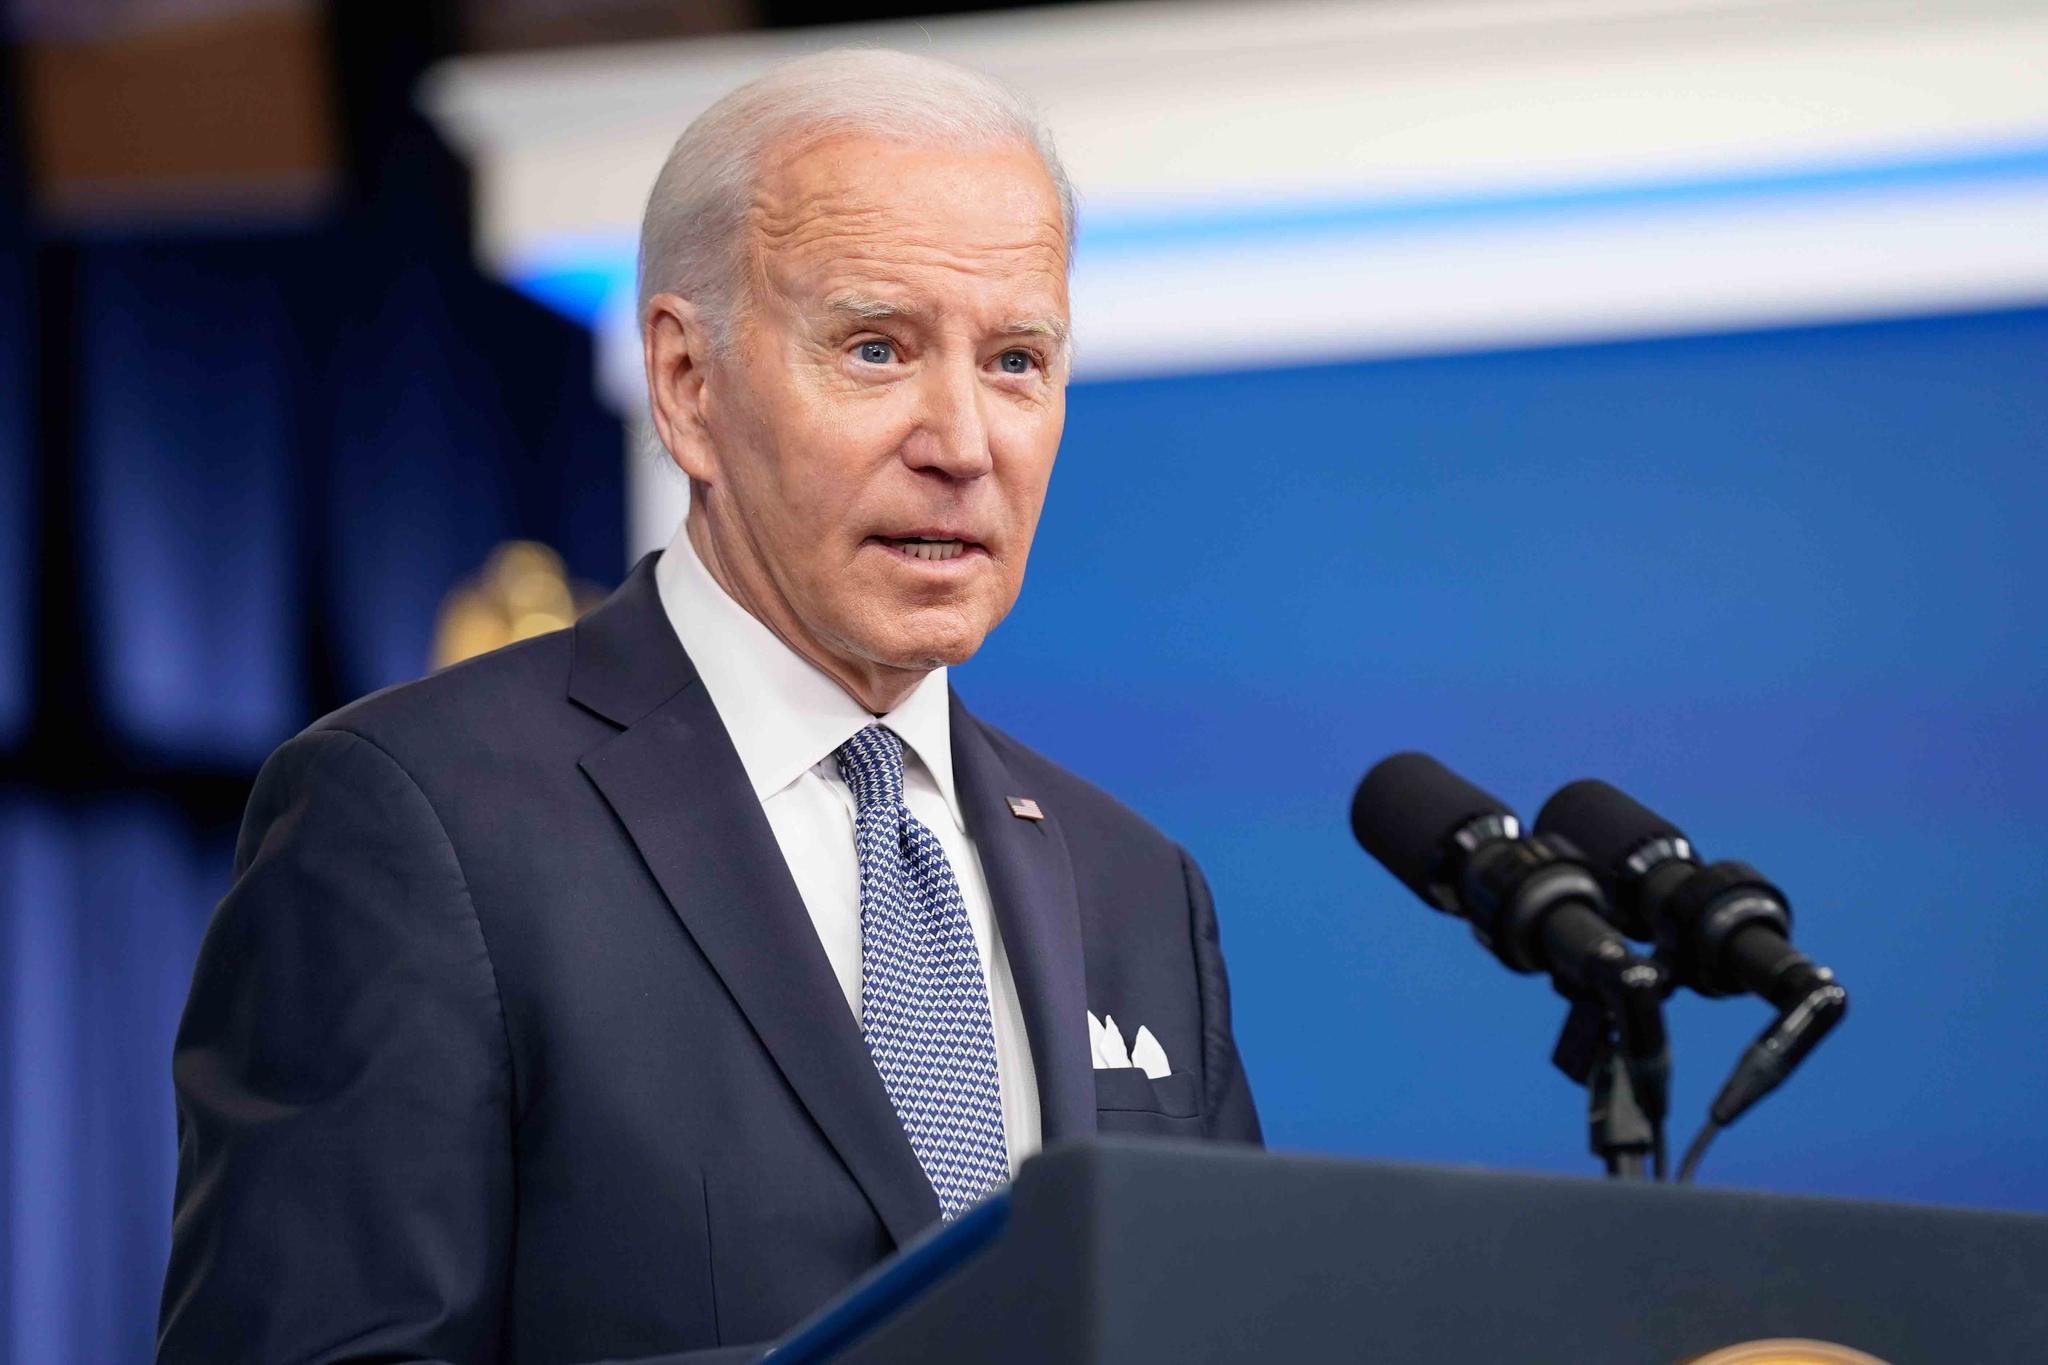 President Joe Biden responds to questions from reporters after speaking about the economy in the South Court Auditorium in the Eisenhower Executive Office Building on the White House Campus, Thursday, Jan. 12, 2023, in Washington.